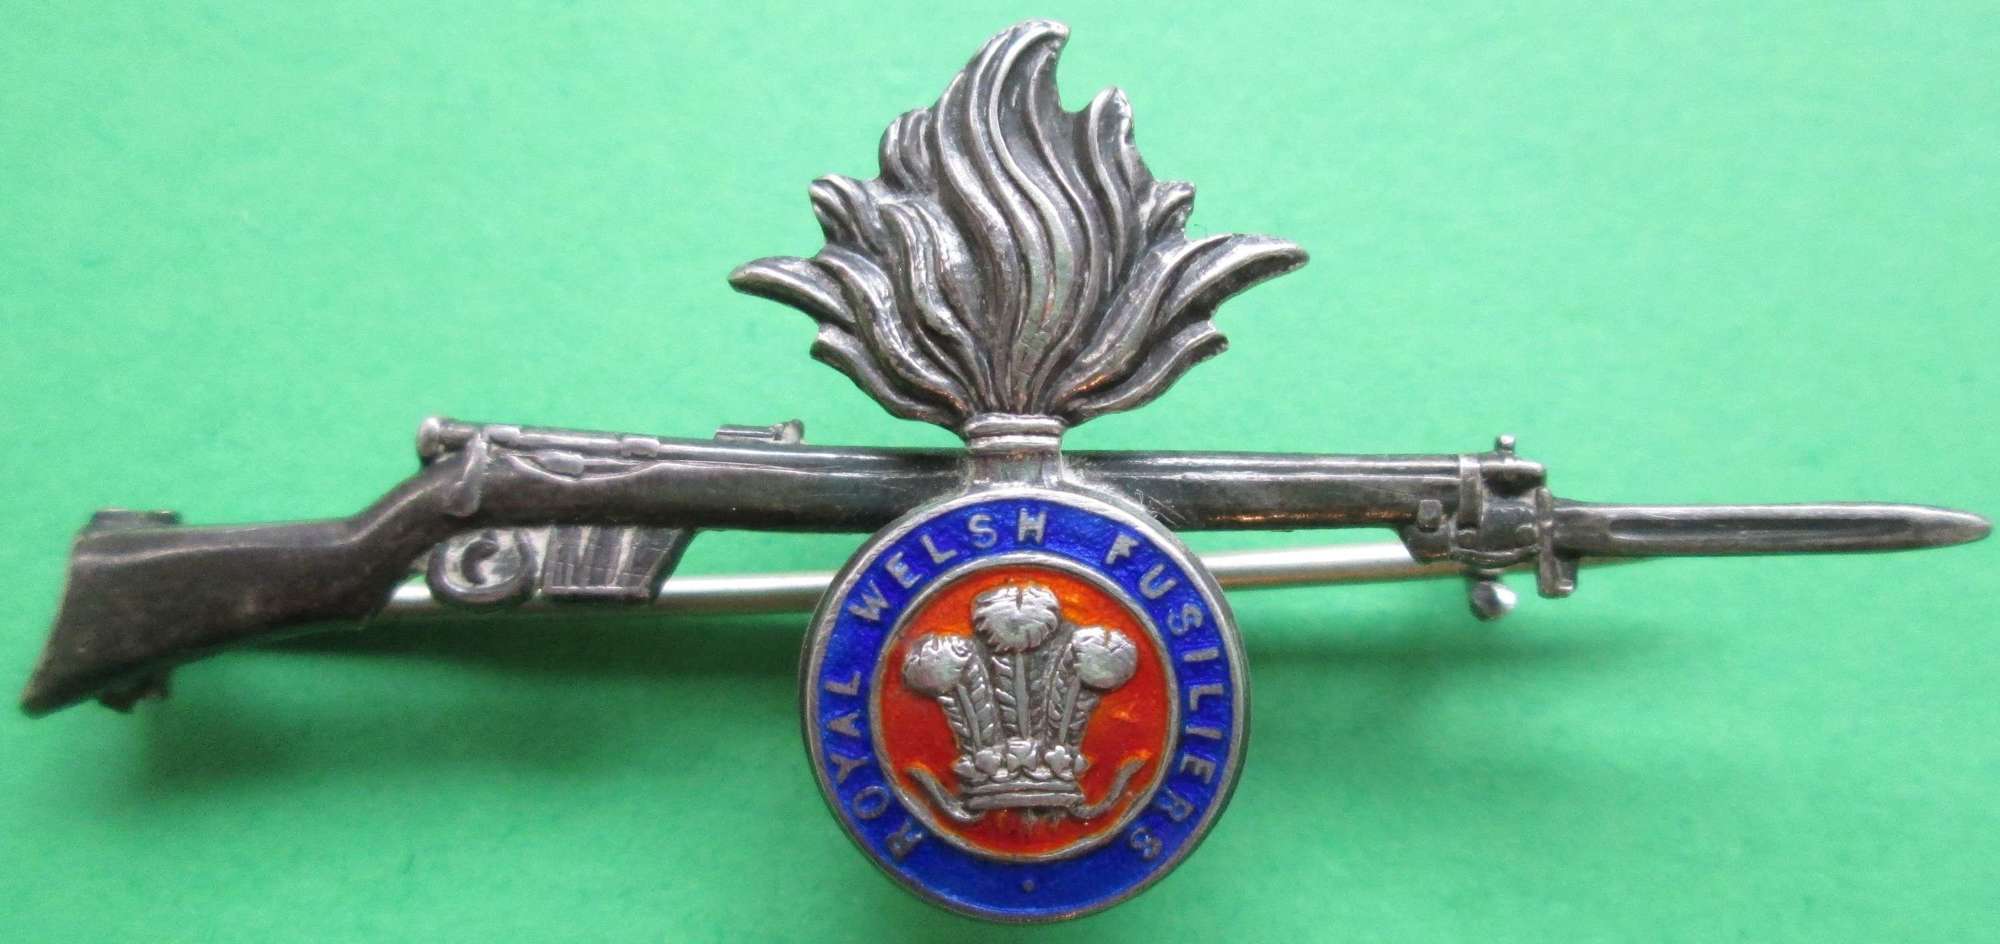 A WWI PERIOD ROYAL WELSH FUSILERS RIFLE SWEETHEART BROOCH